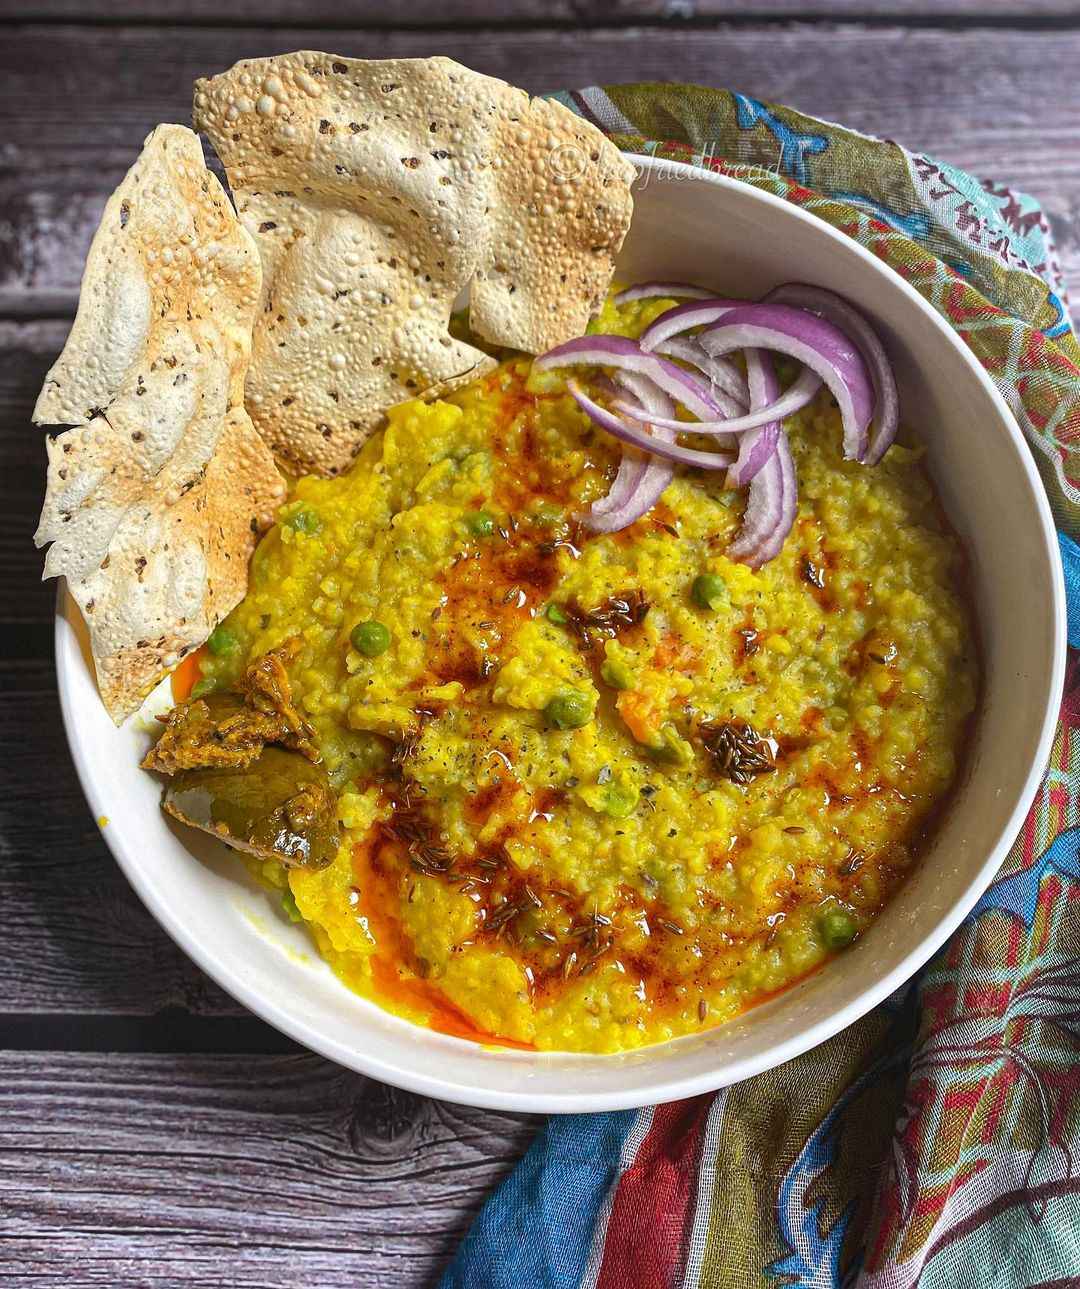 A bowl of khichdi made with rice, moong daal, with papad and onions